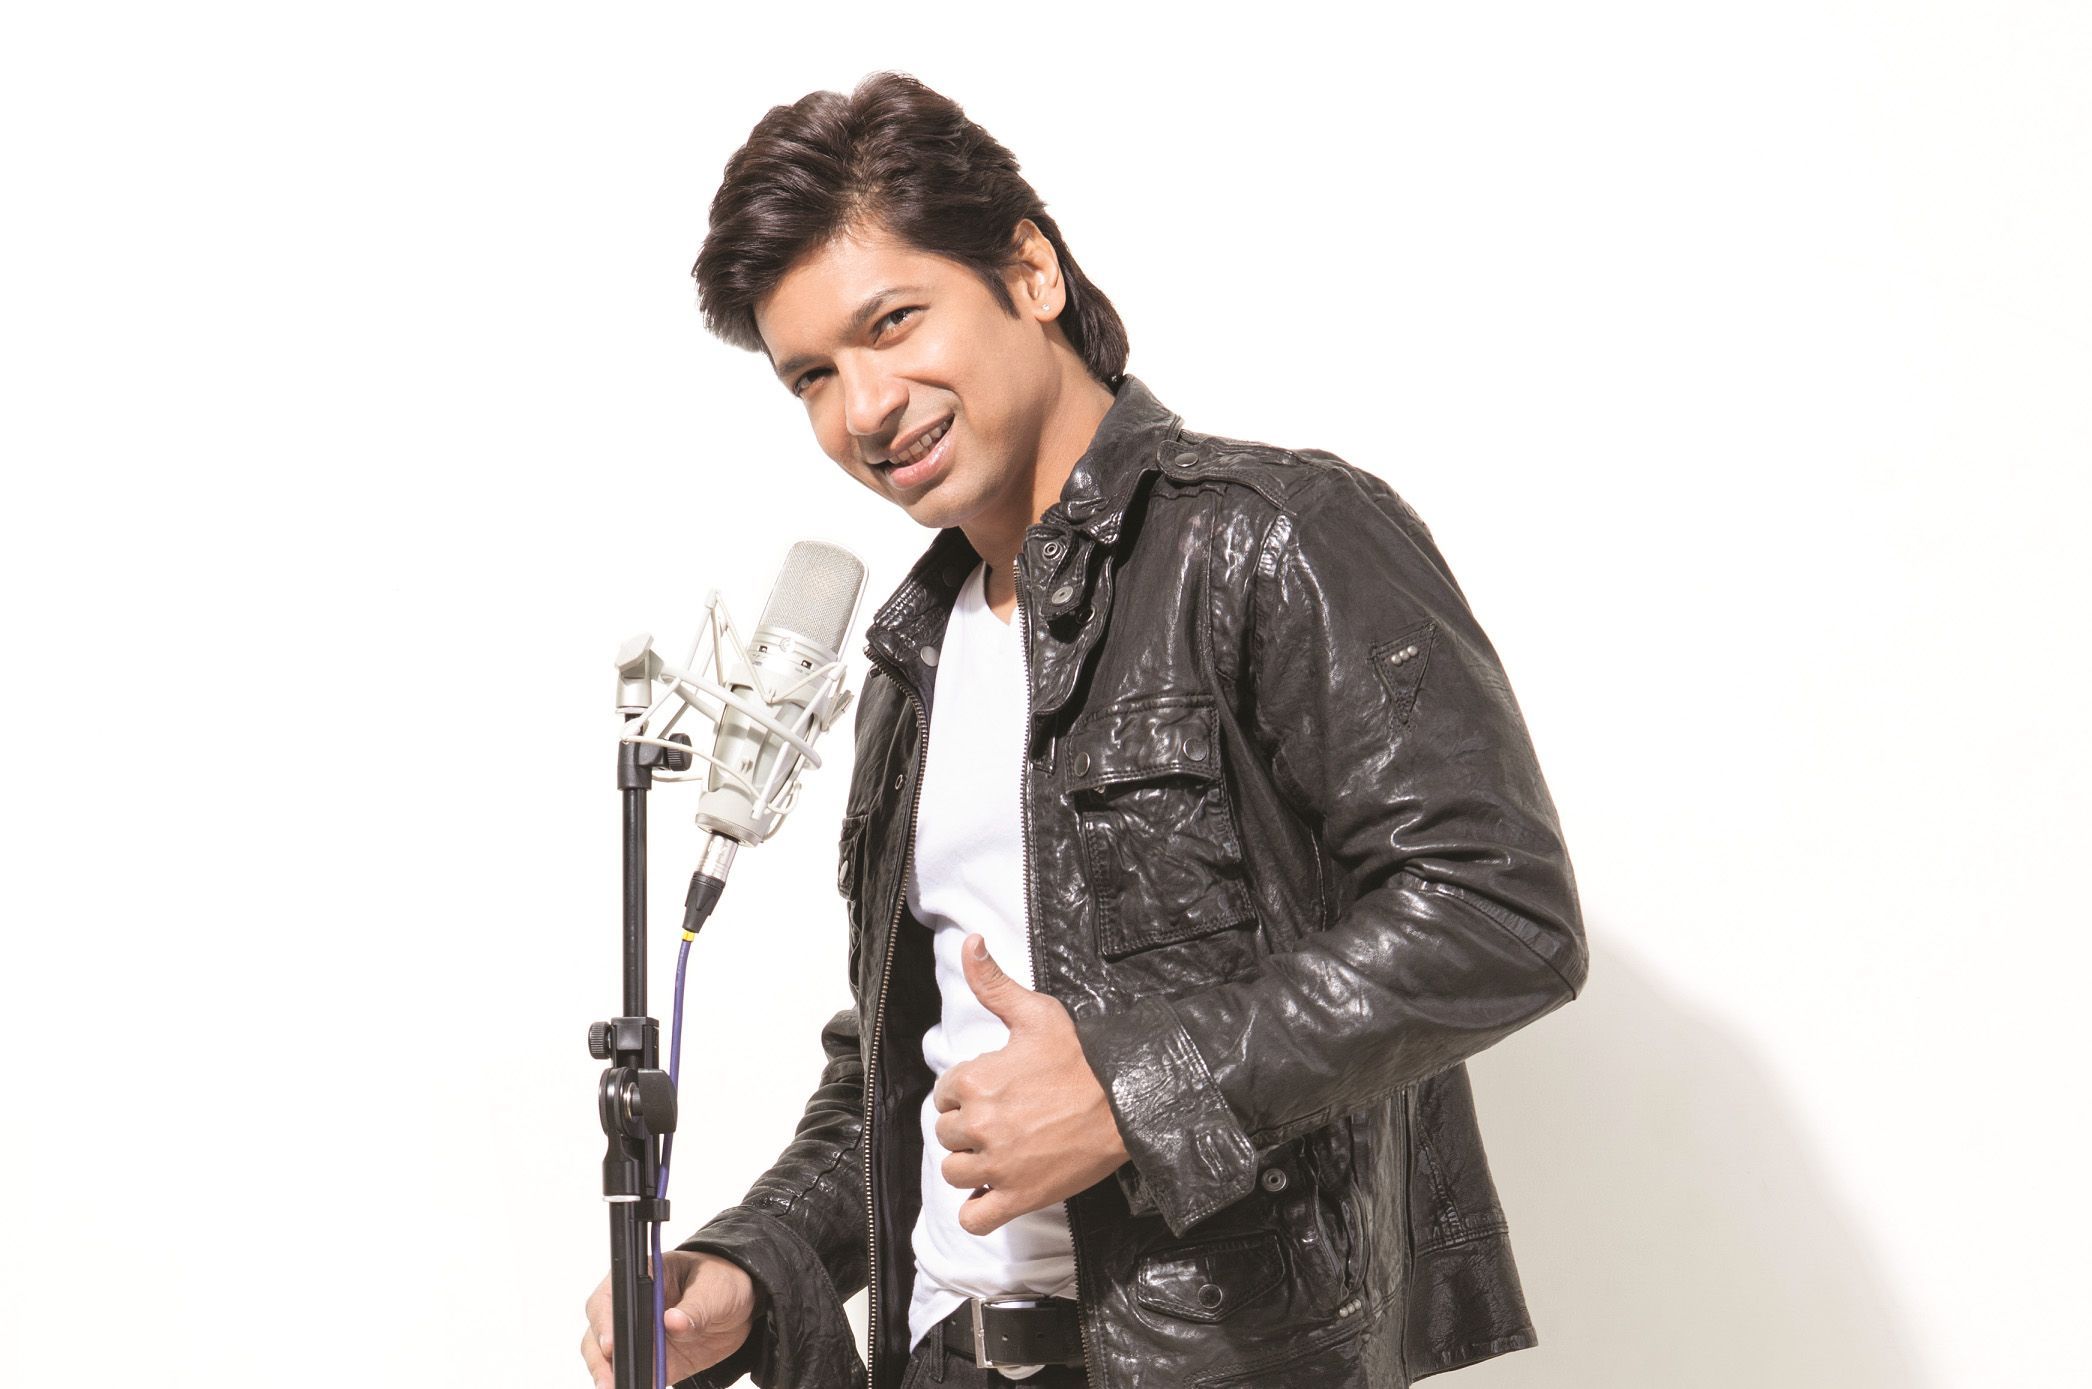 Shaan Indian Playback Singer Photohoot And Image Collections